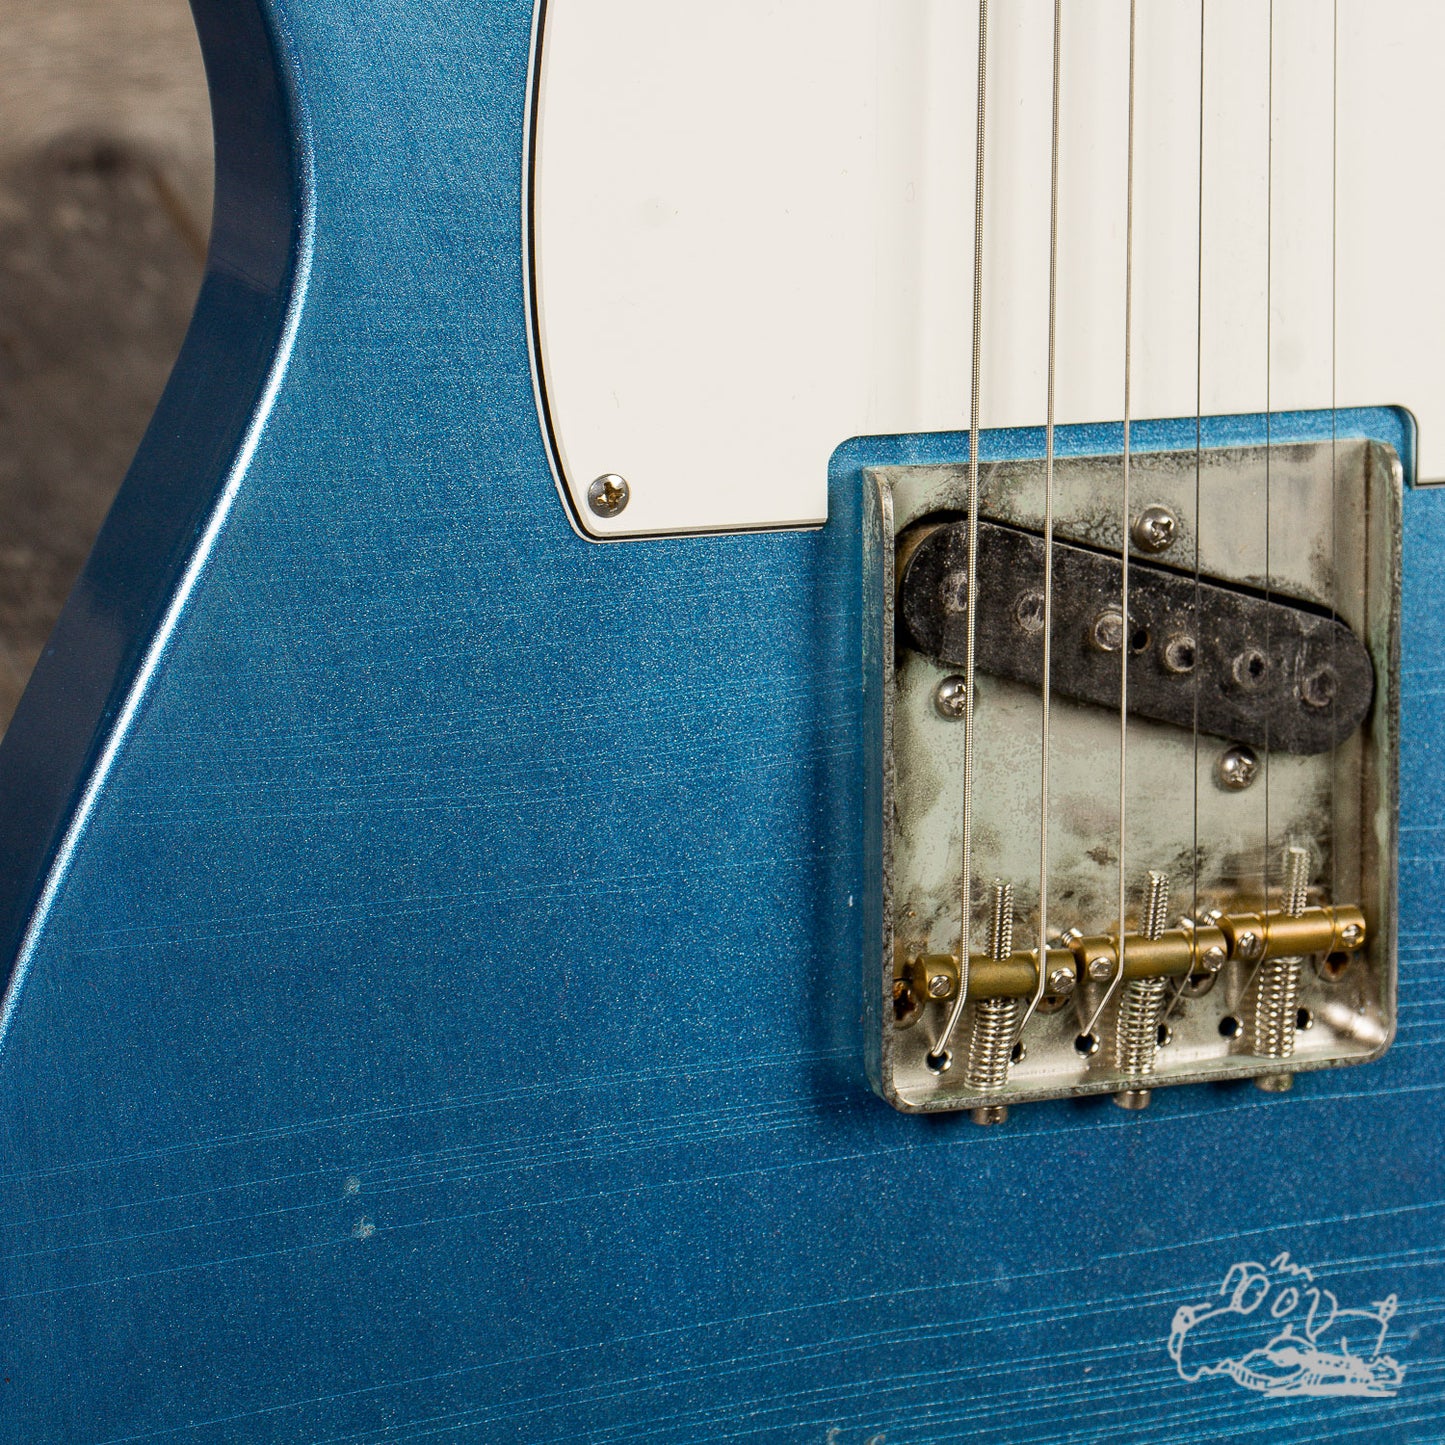 2020 Eric Daw Pinup T Style, Aged Ice Blue Metallic Relic, "Vicky"